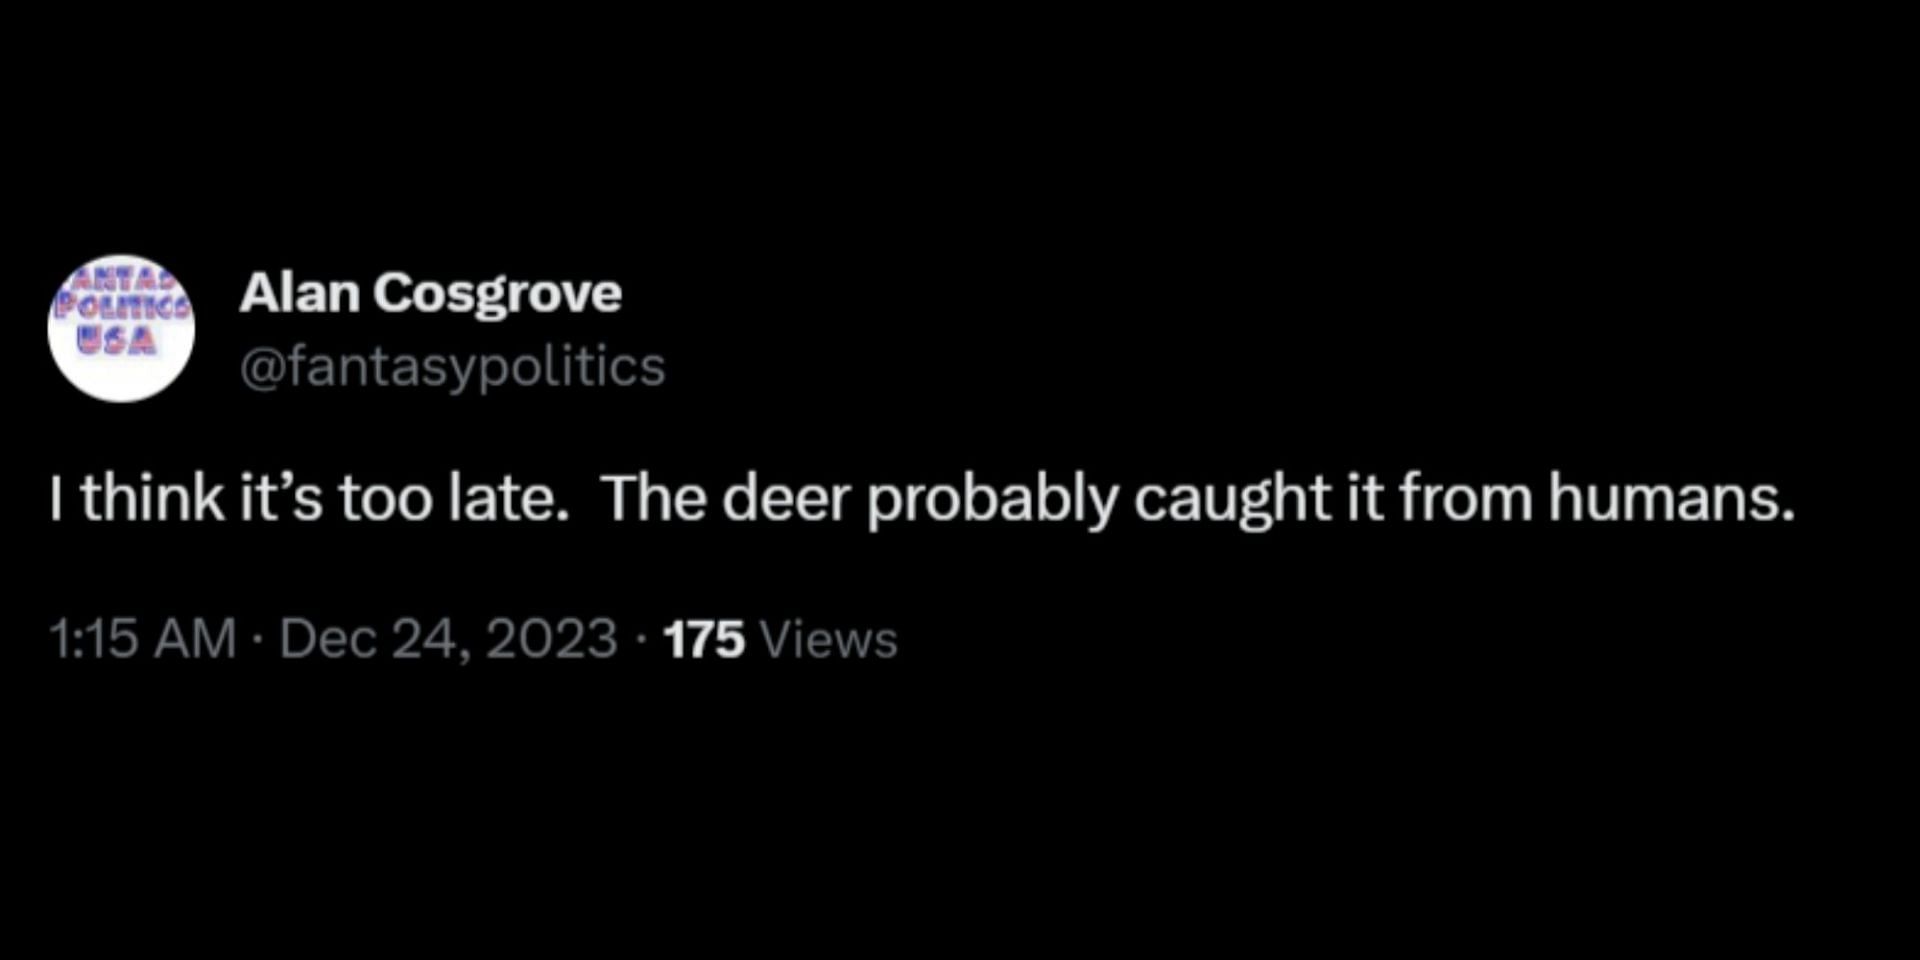 Netizens react to the news of prion disease spreading into humans from deer. (Image via X/@FoxNews)